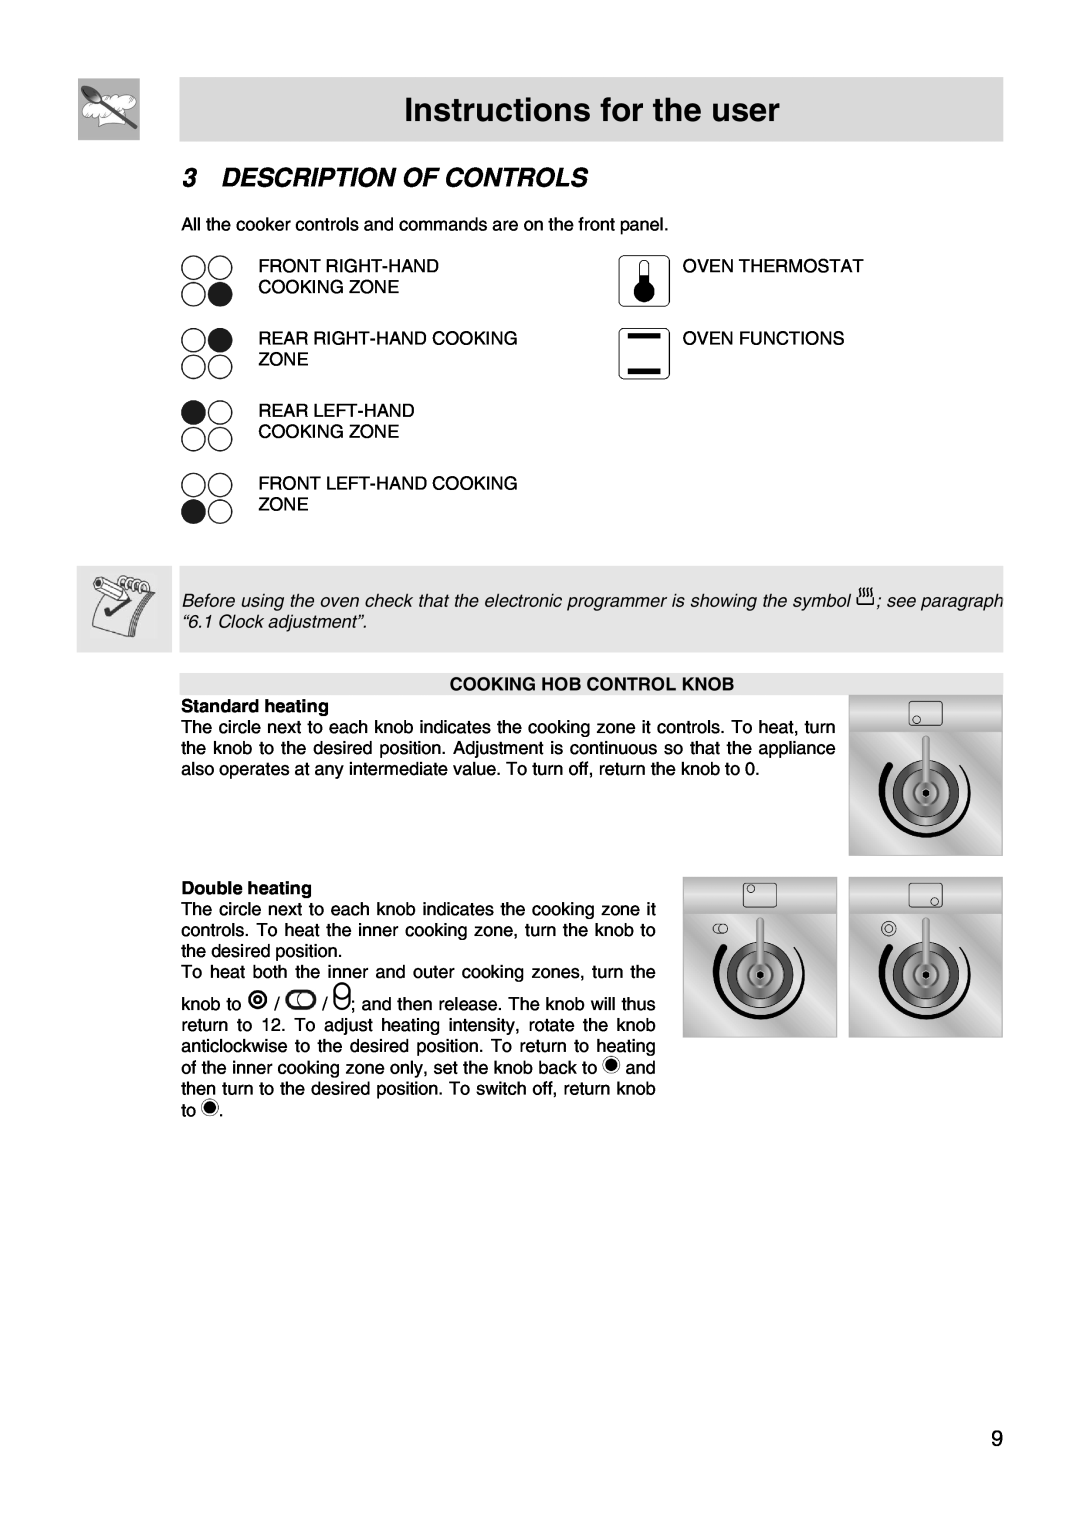 Smeg FS66MFX Instructions for the user, Description Of Controls, COOKING HOB CONTROL KNOB Standard heating, Double heating 